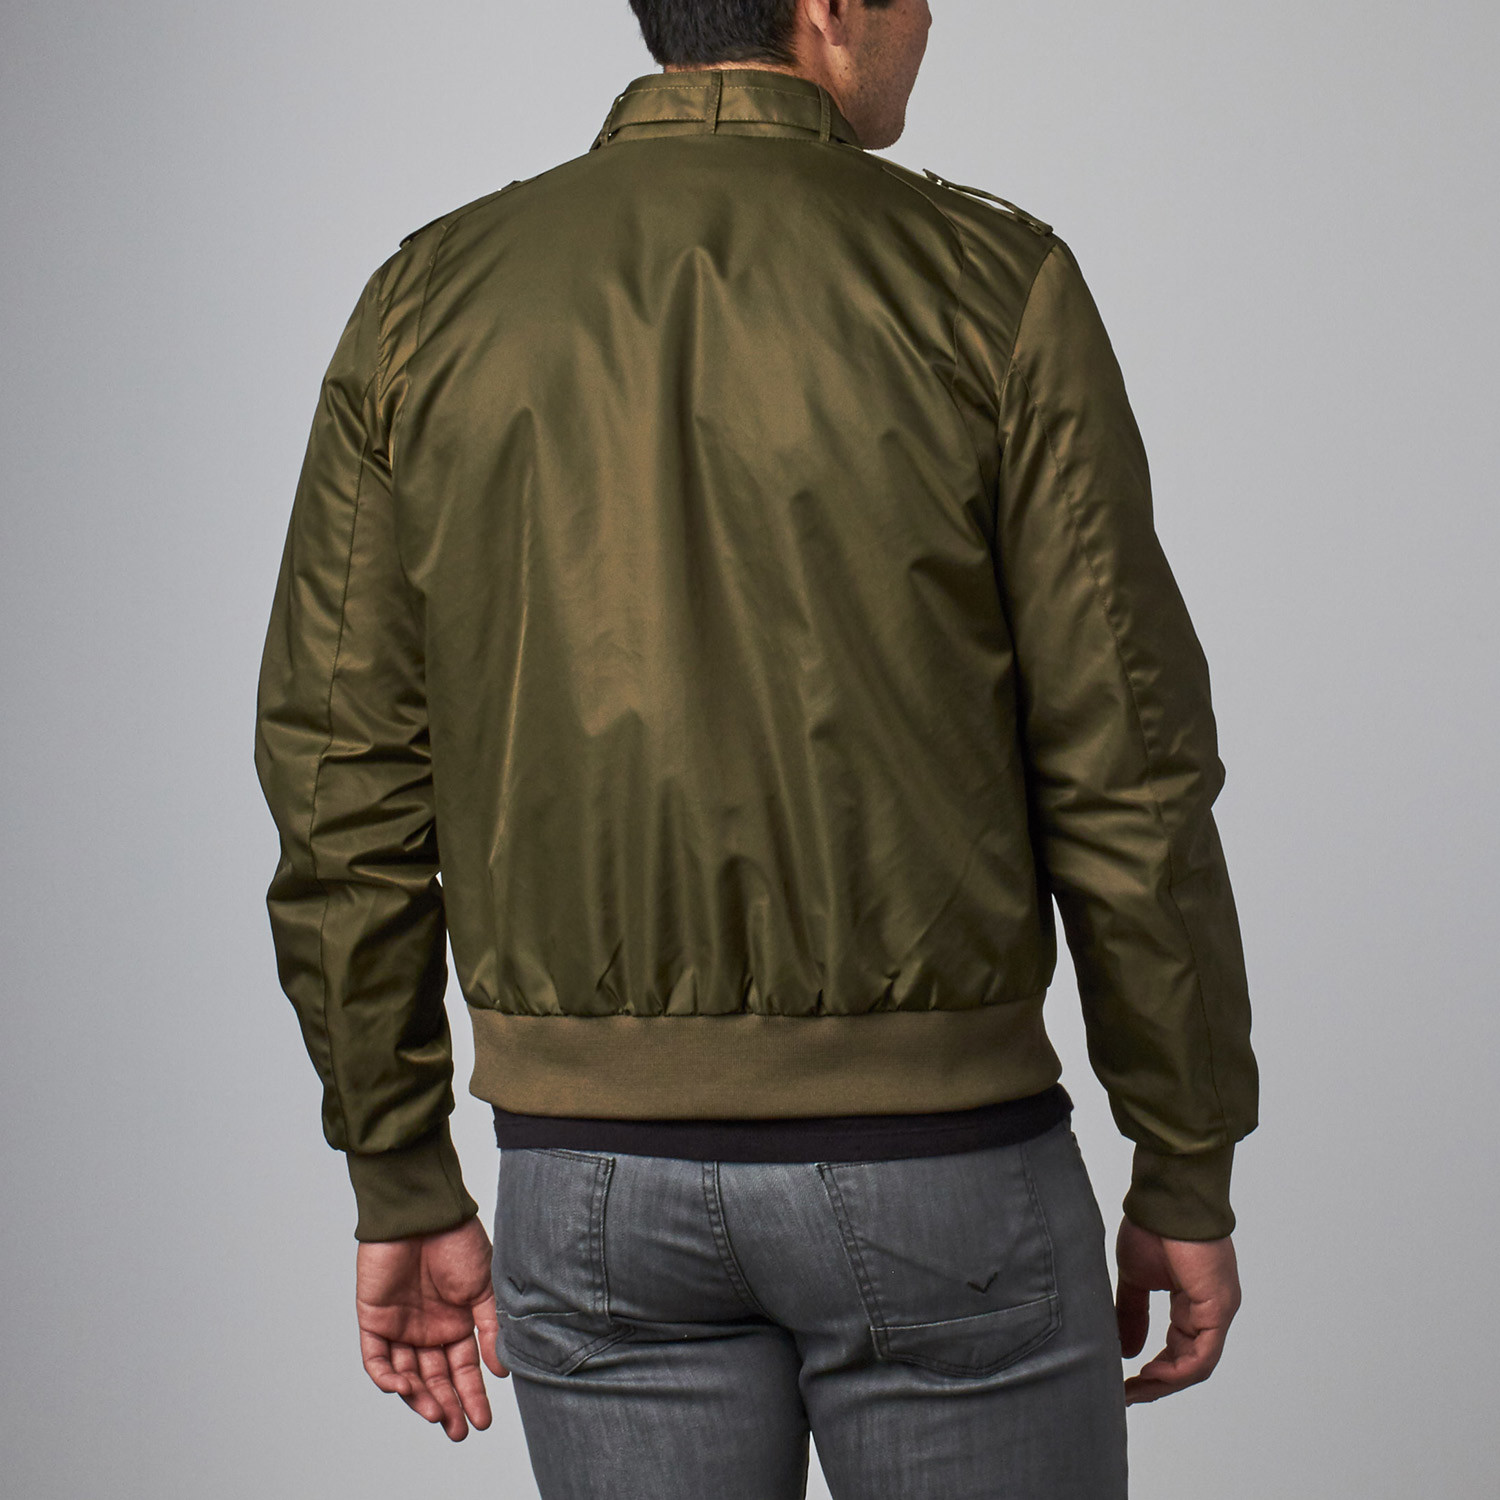 Iconic Racer Jacket Nylon Flight Satin // Army Green (S) - Members Only ...